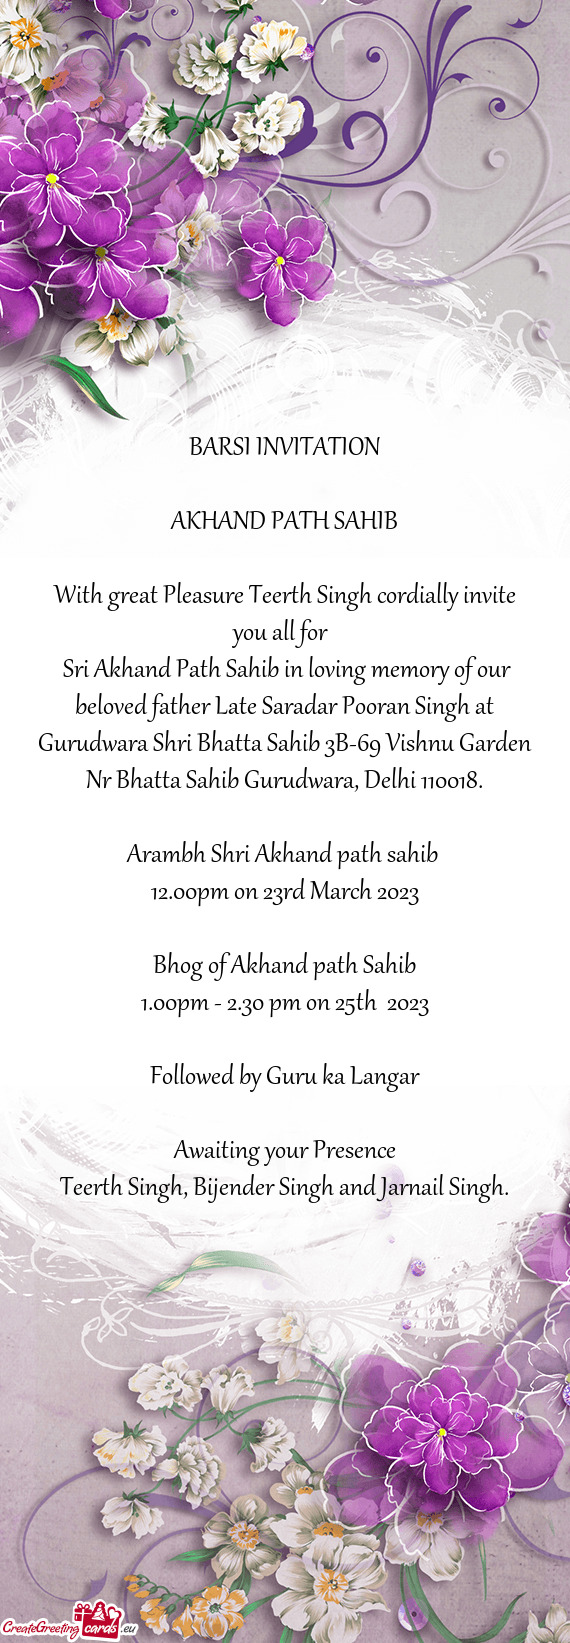 With great Pleasure Teerth Singh cordially invite you all for